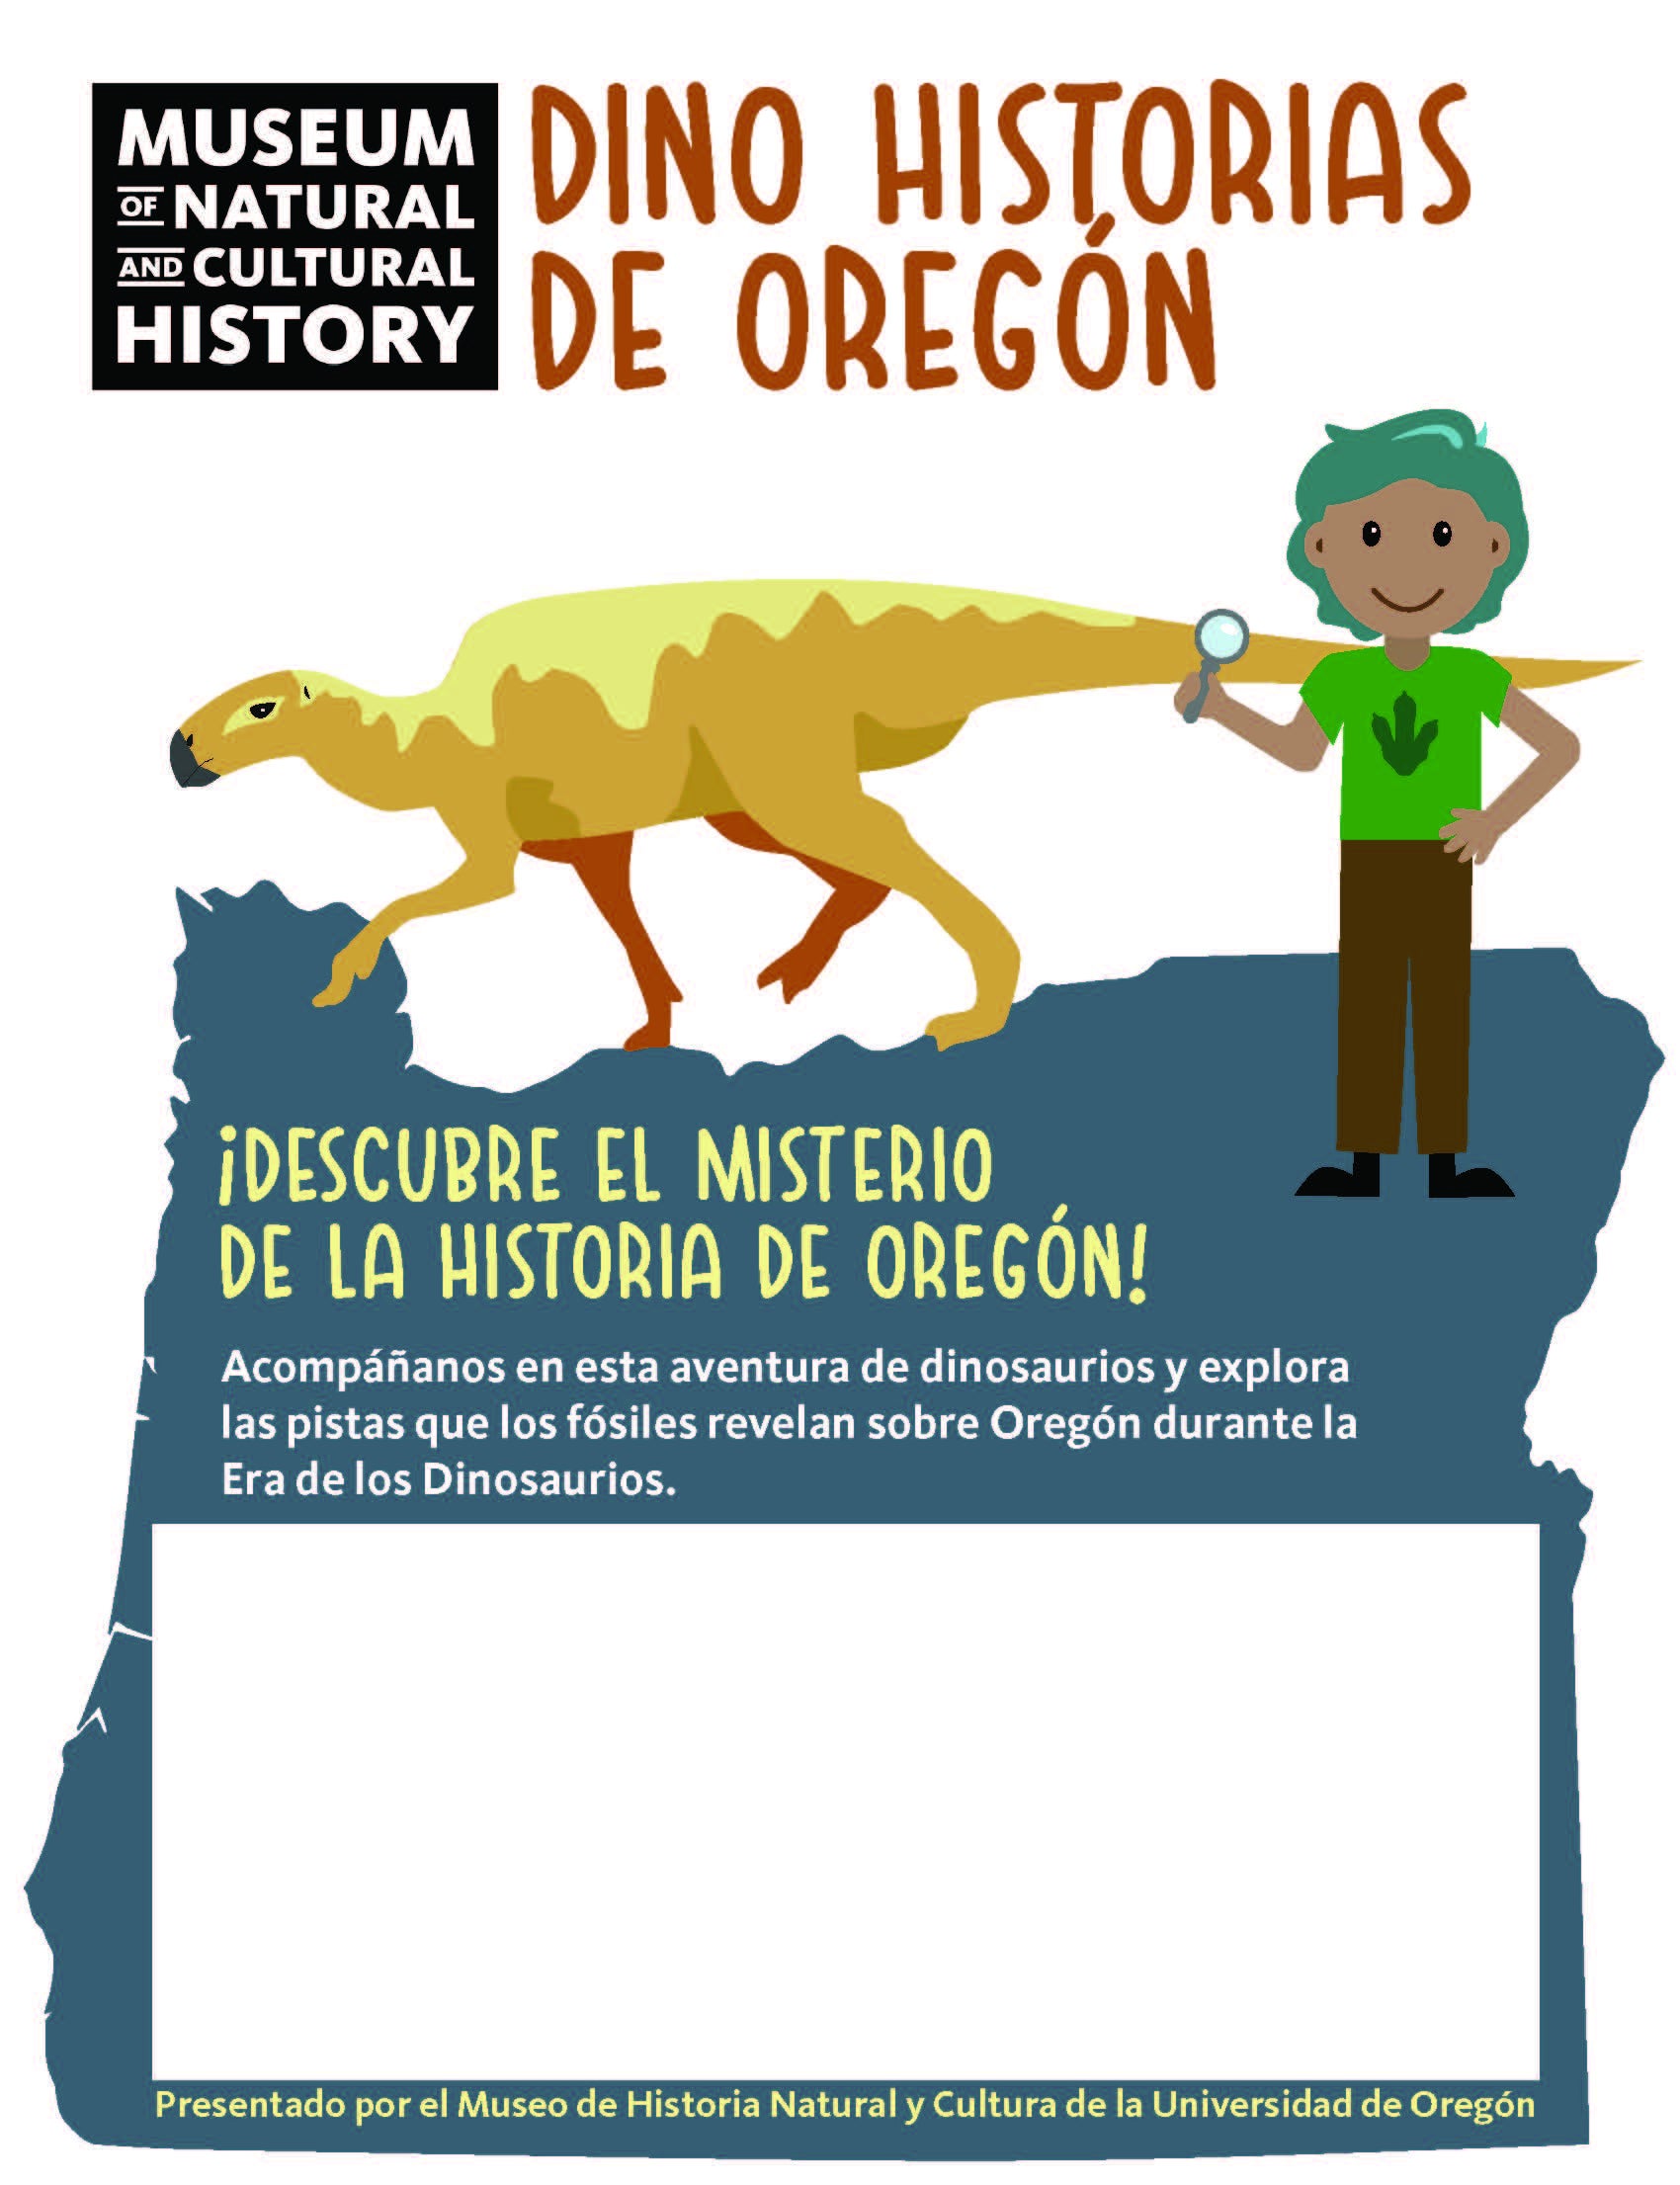 A dinosaur appears beneath the title Oregon's Dino-Story and bove a blank space for program details